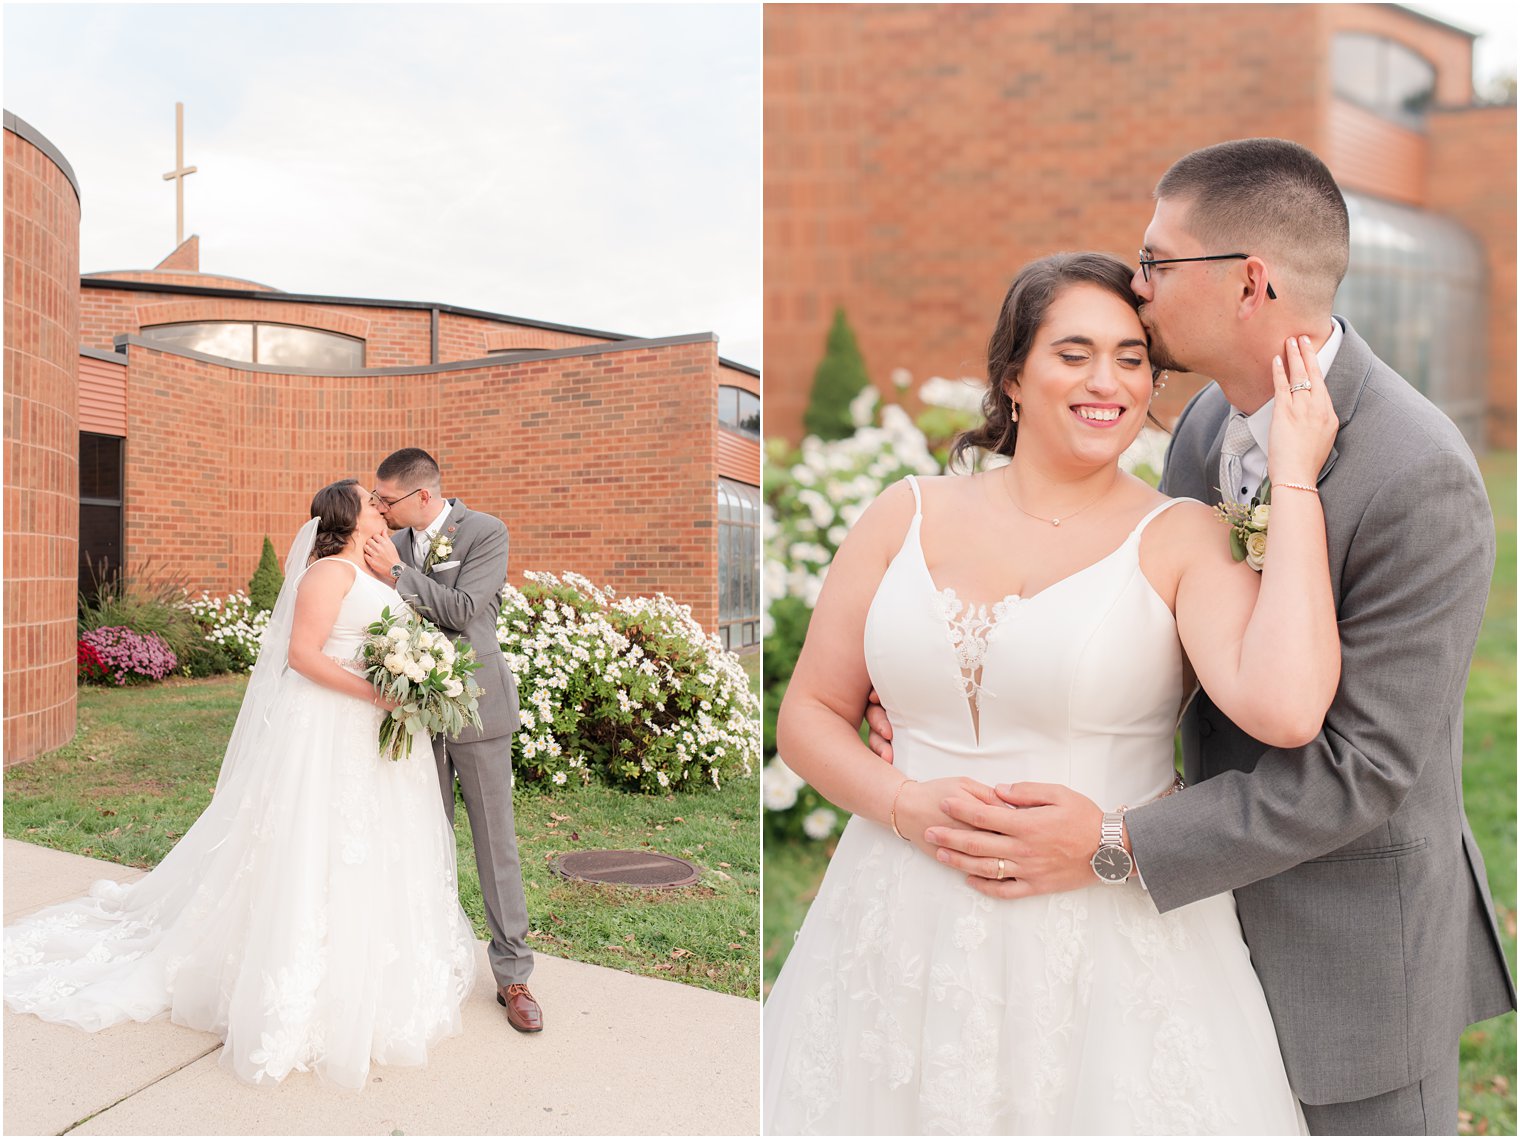 New Jersey wedding portraits for bride and groom